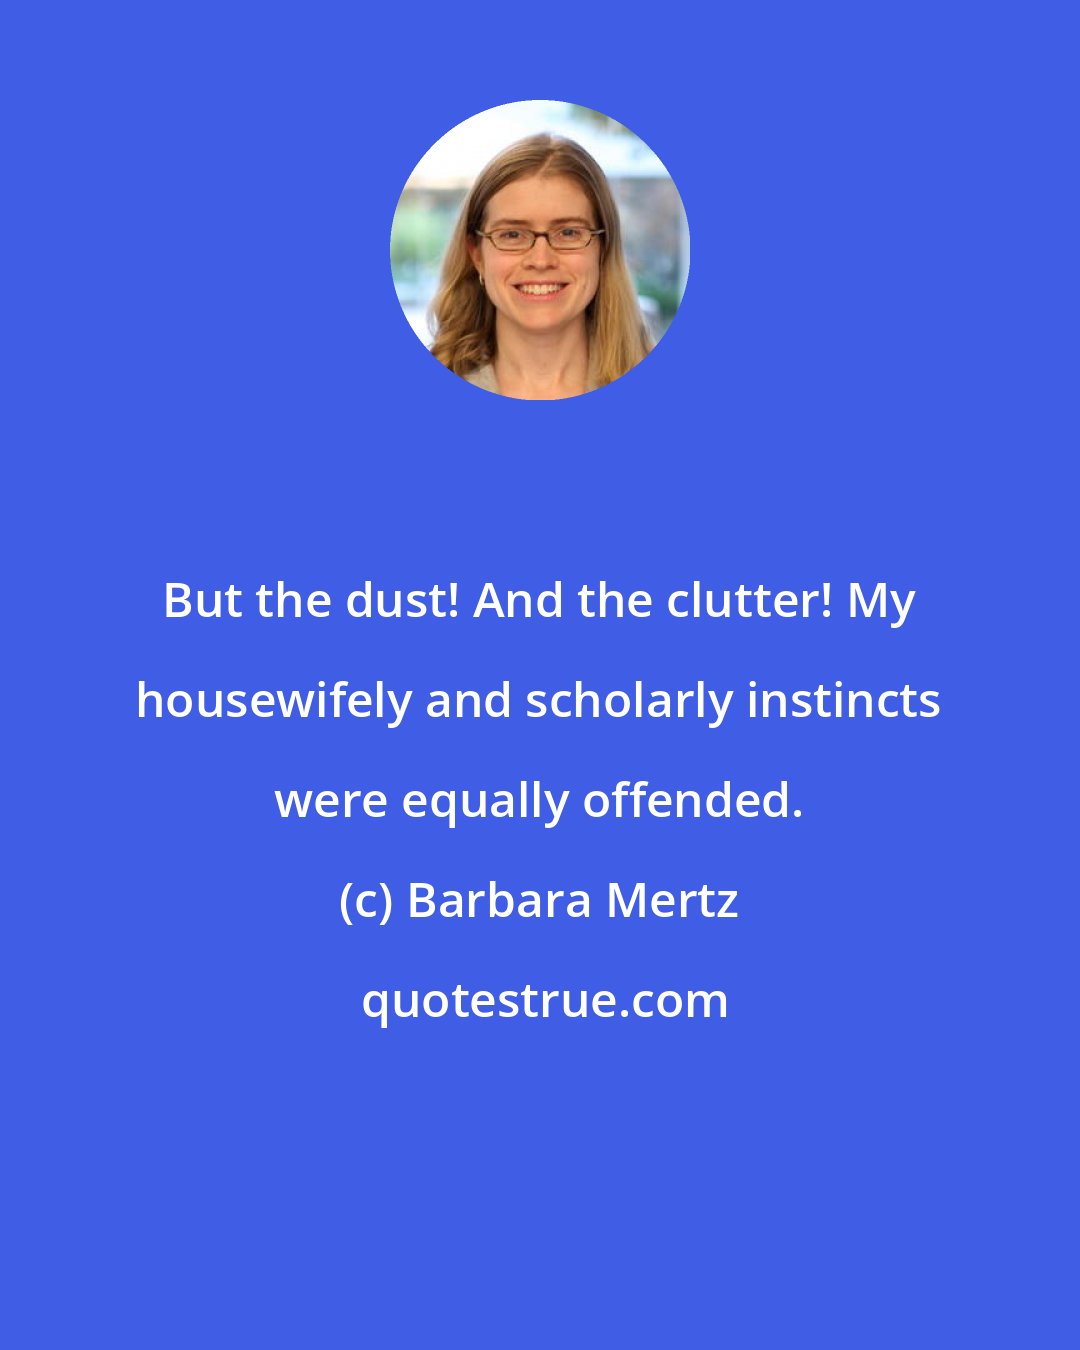 Barbara Mertz: But the dust! And the clutter! My housewifely and scholarly instincts were equally offended.